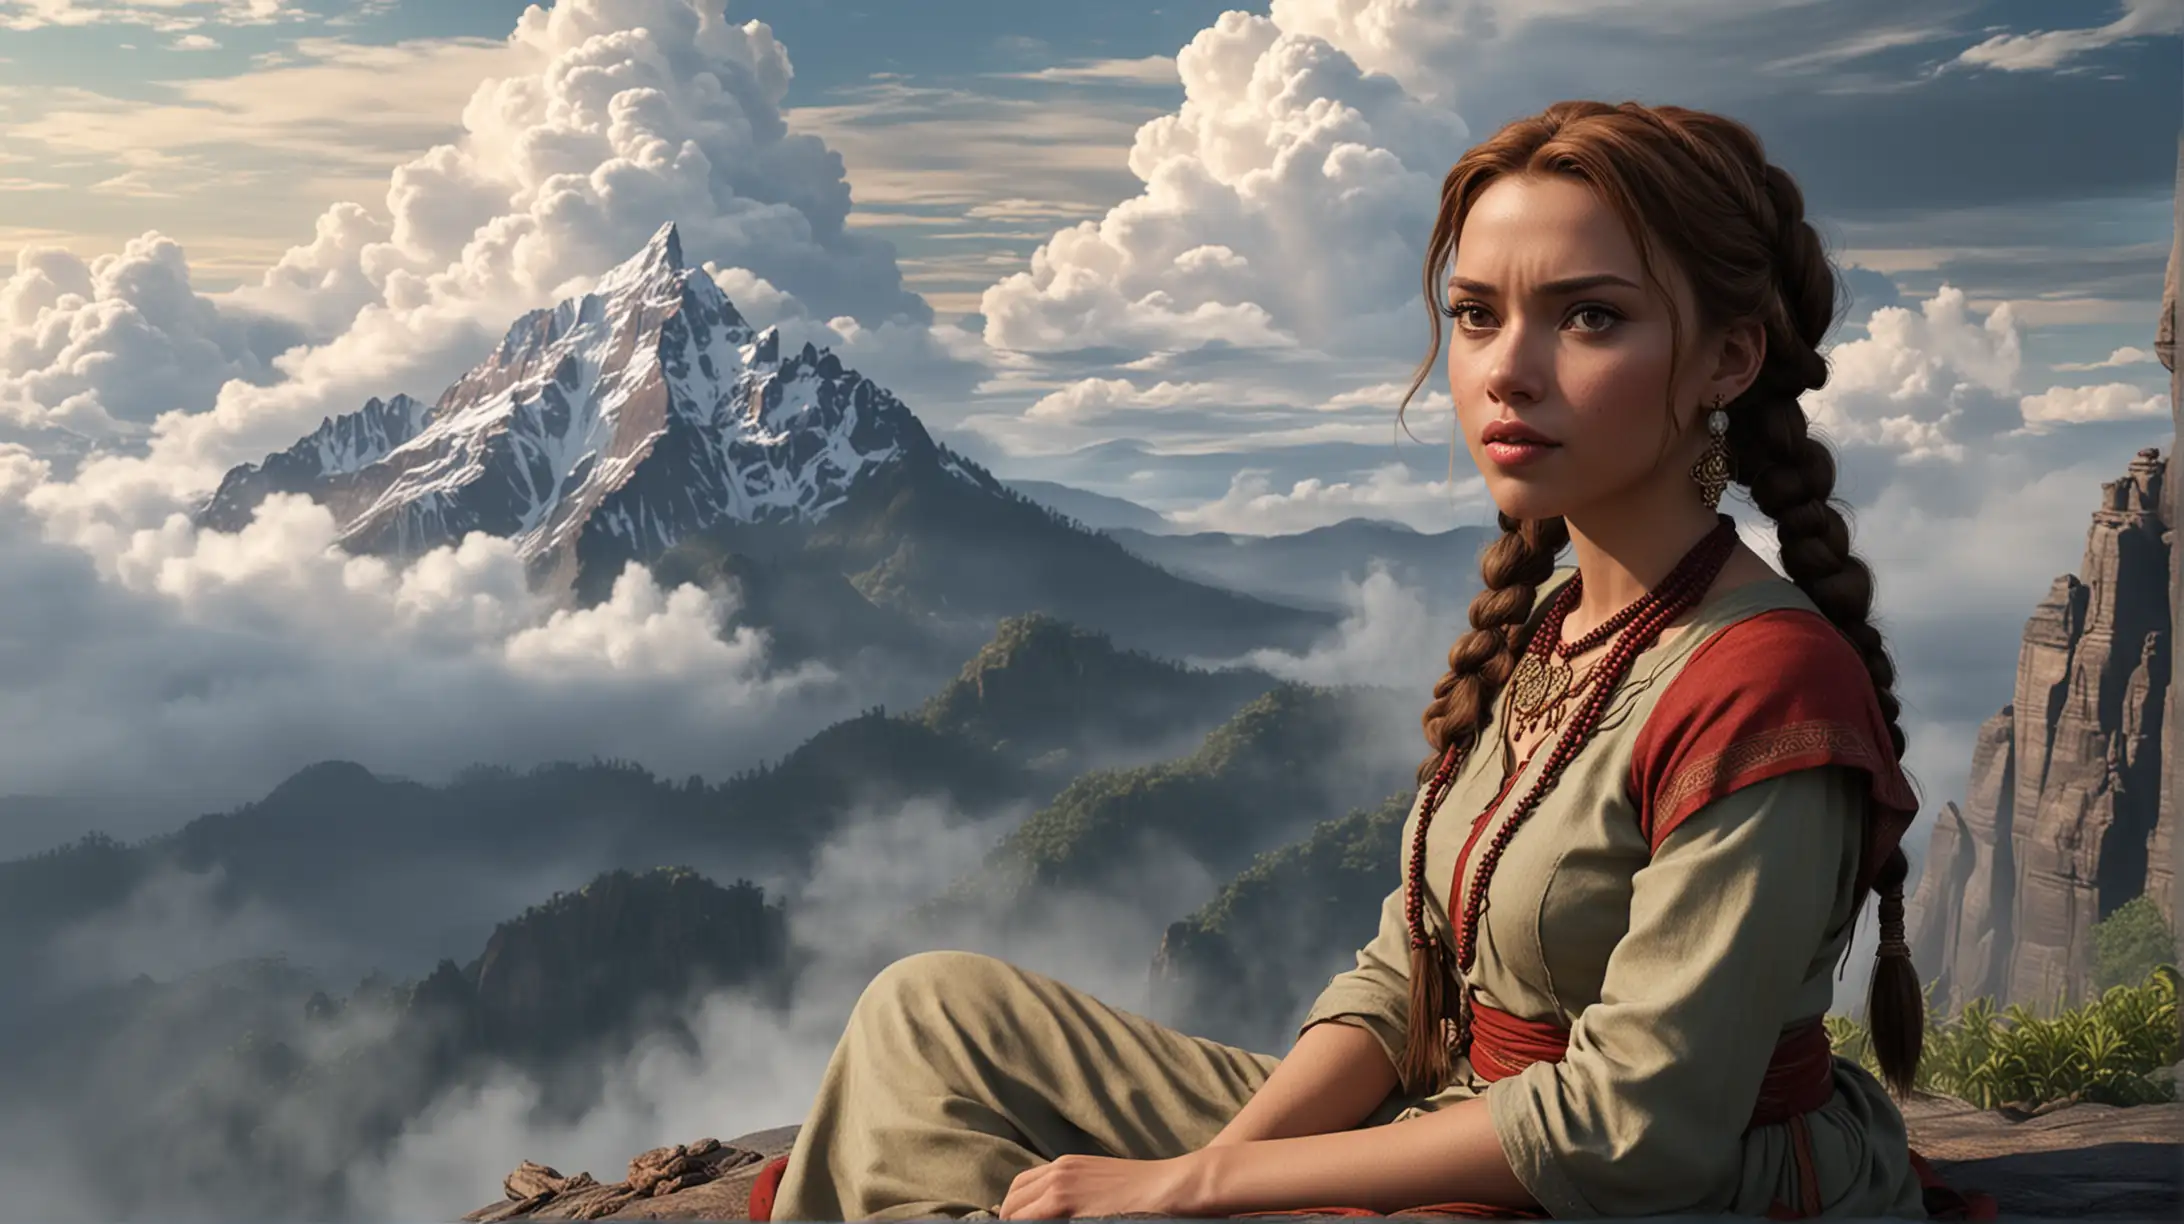 cartoon, Scarlett Johansson as indian woman sit on top of a mountain, close-up, clouds, fog, pigtails